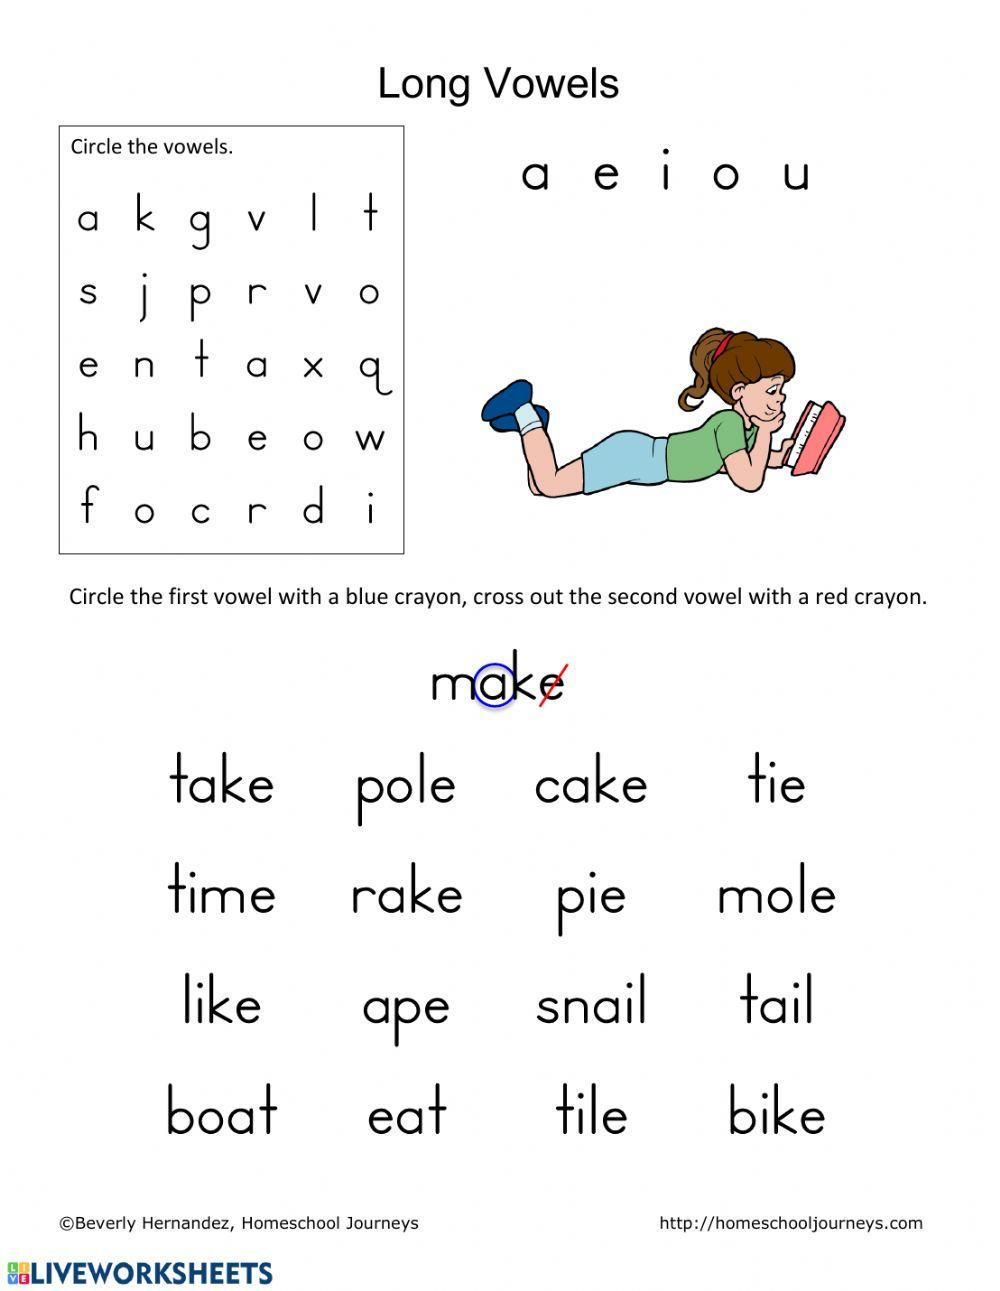 Vowel Review - Intro to Long Vowels